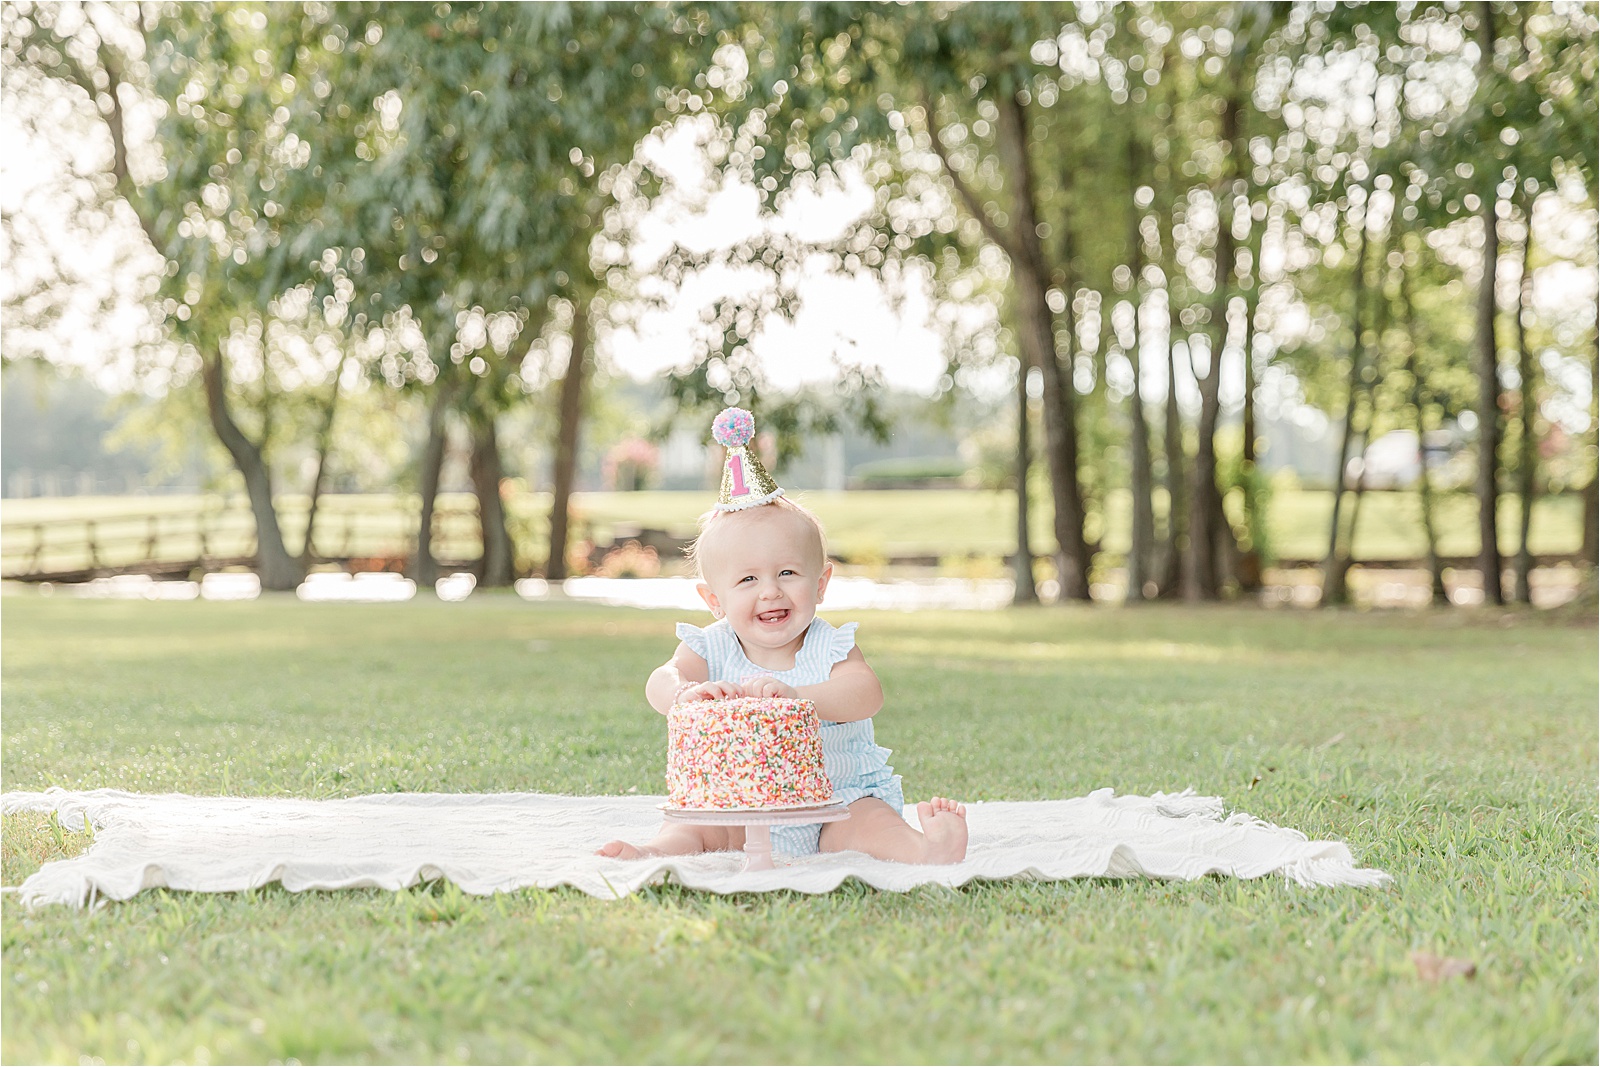 Photos of Baby girl with 1 party hat and sprinkle birthday cake sitting on blanket in grass by photographer in Greenville SC